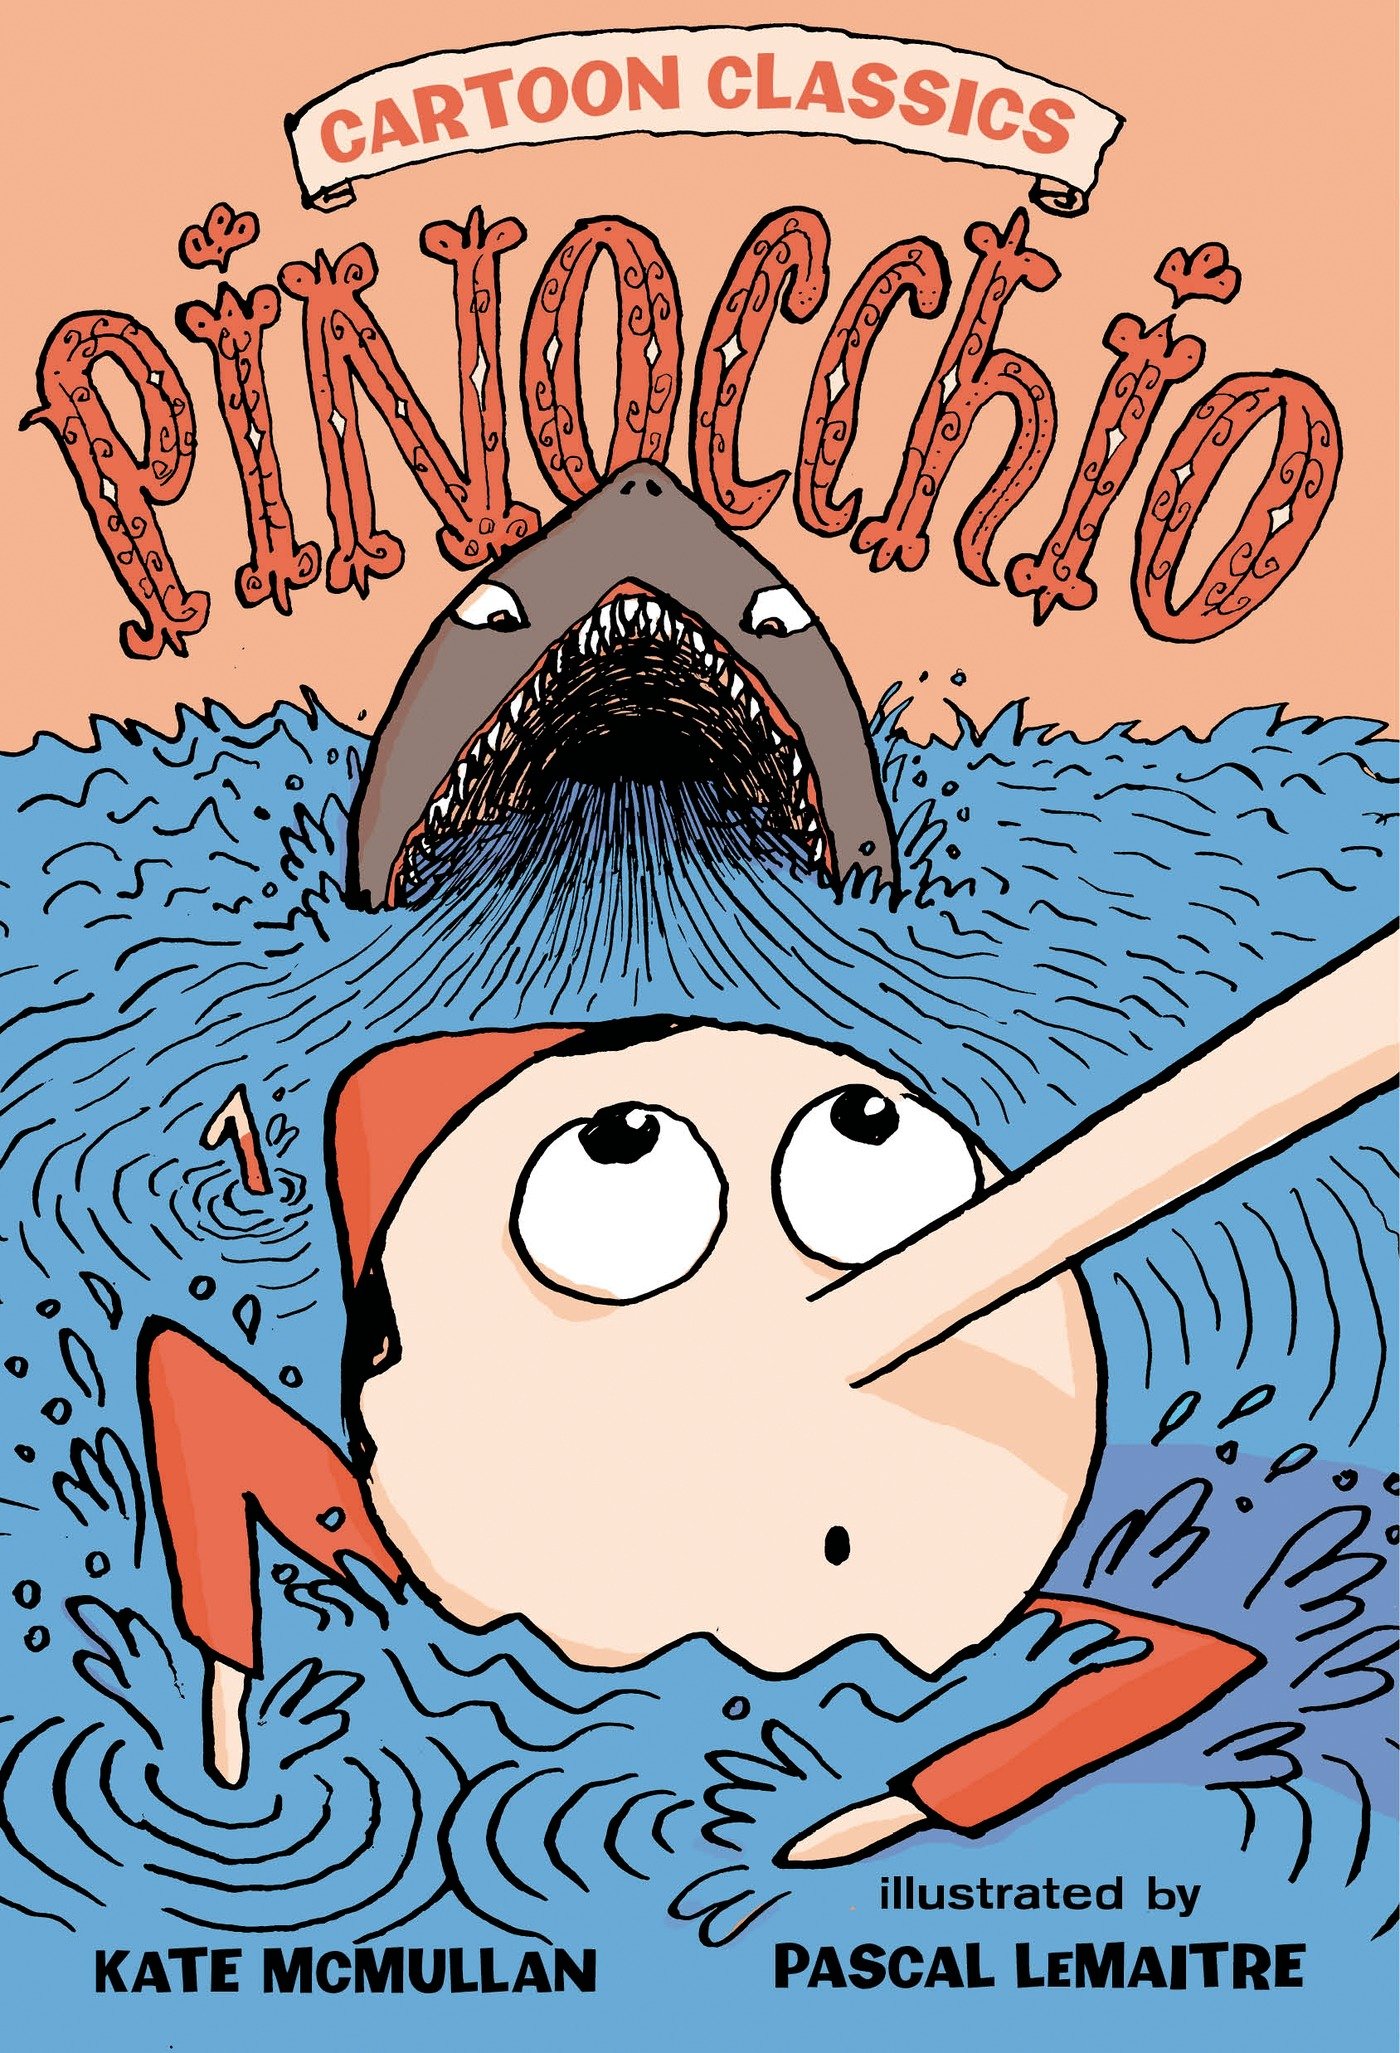 Pinocchio Librarian Preview: Macmillan Childrens Publishing Group (Fall 2014)